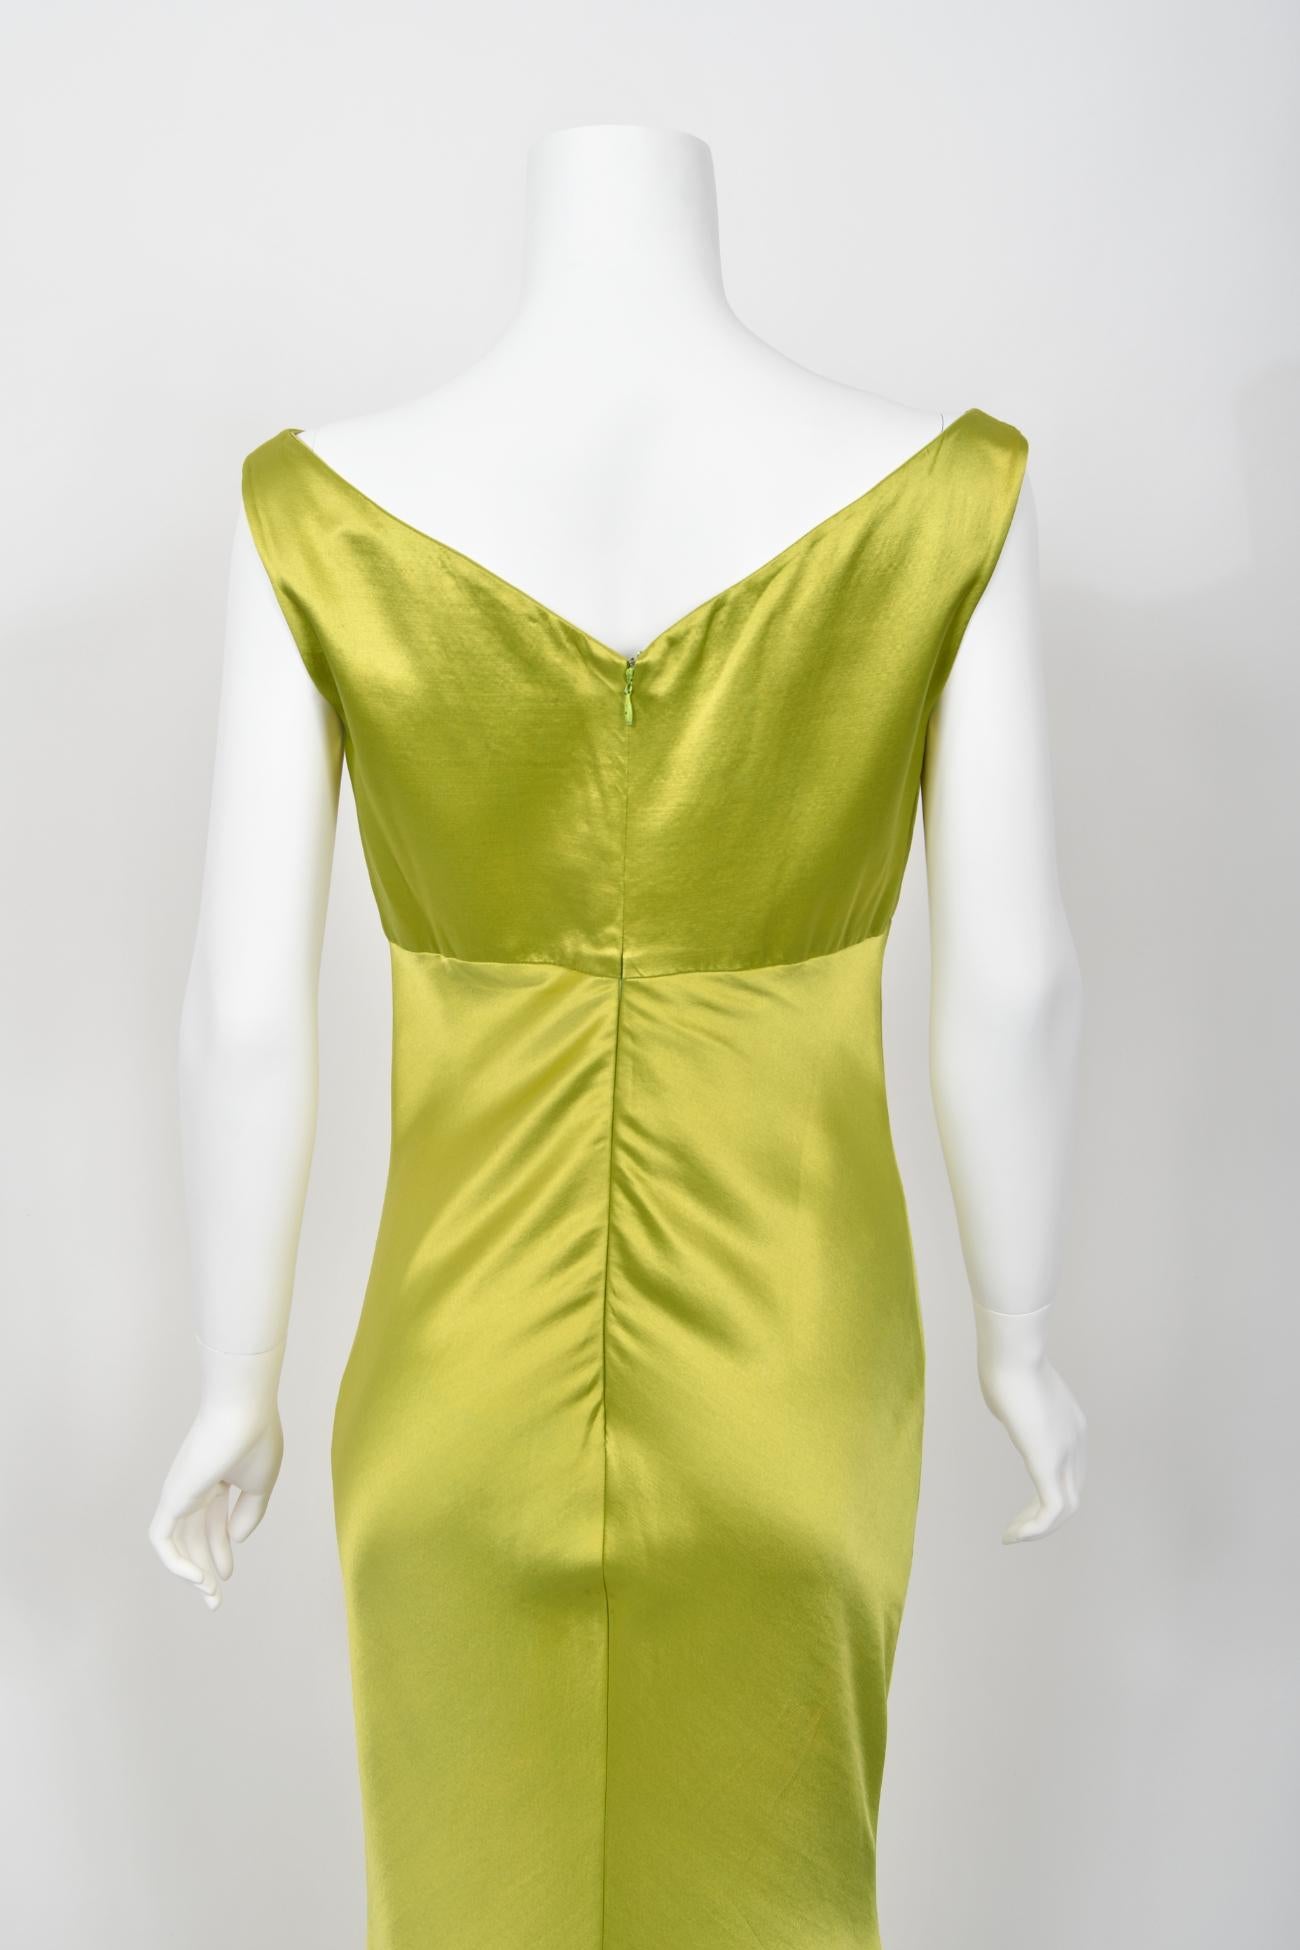 1995 Gianni Versace Couture Documented Runway Chartreuse Silk Off-Shoulder Gown For Sale 14